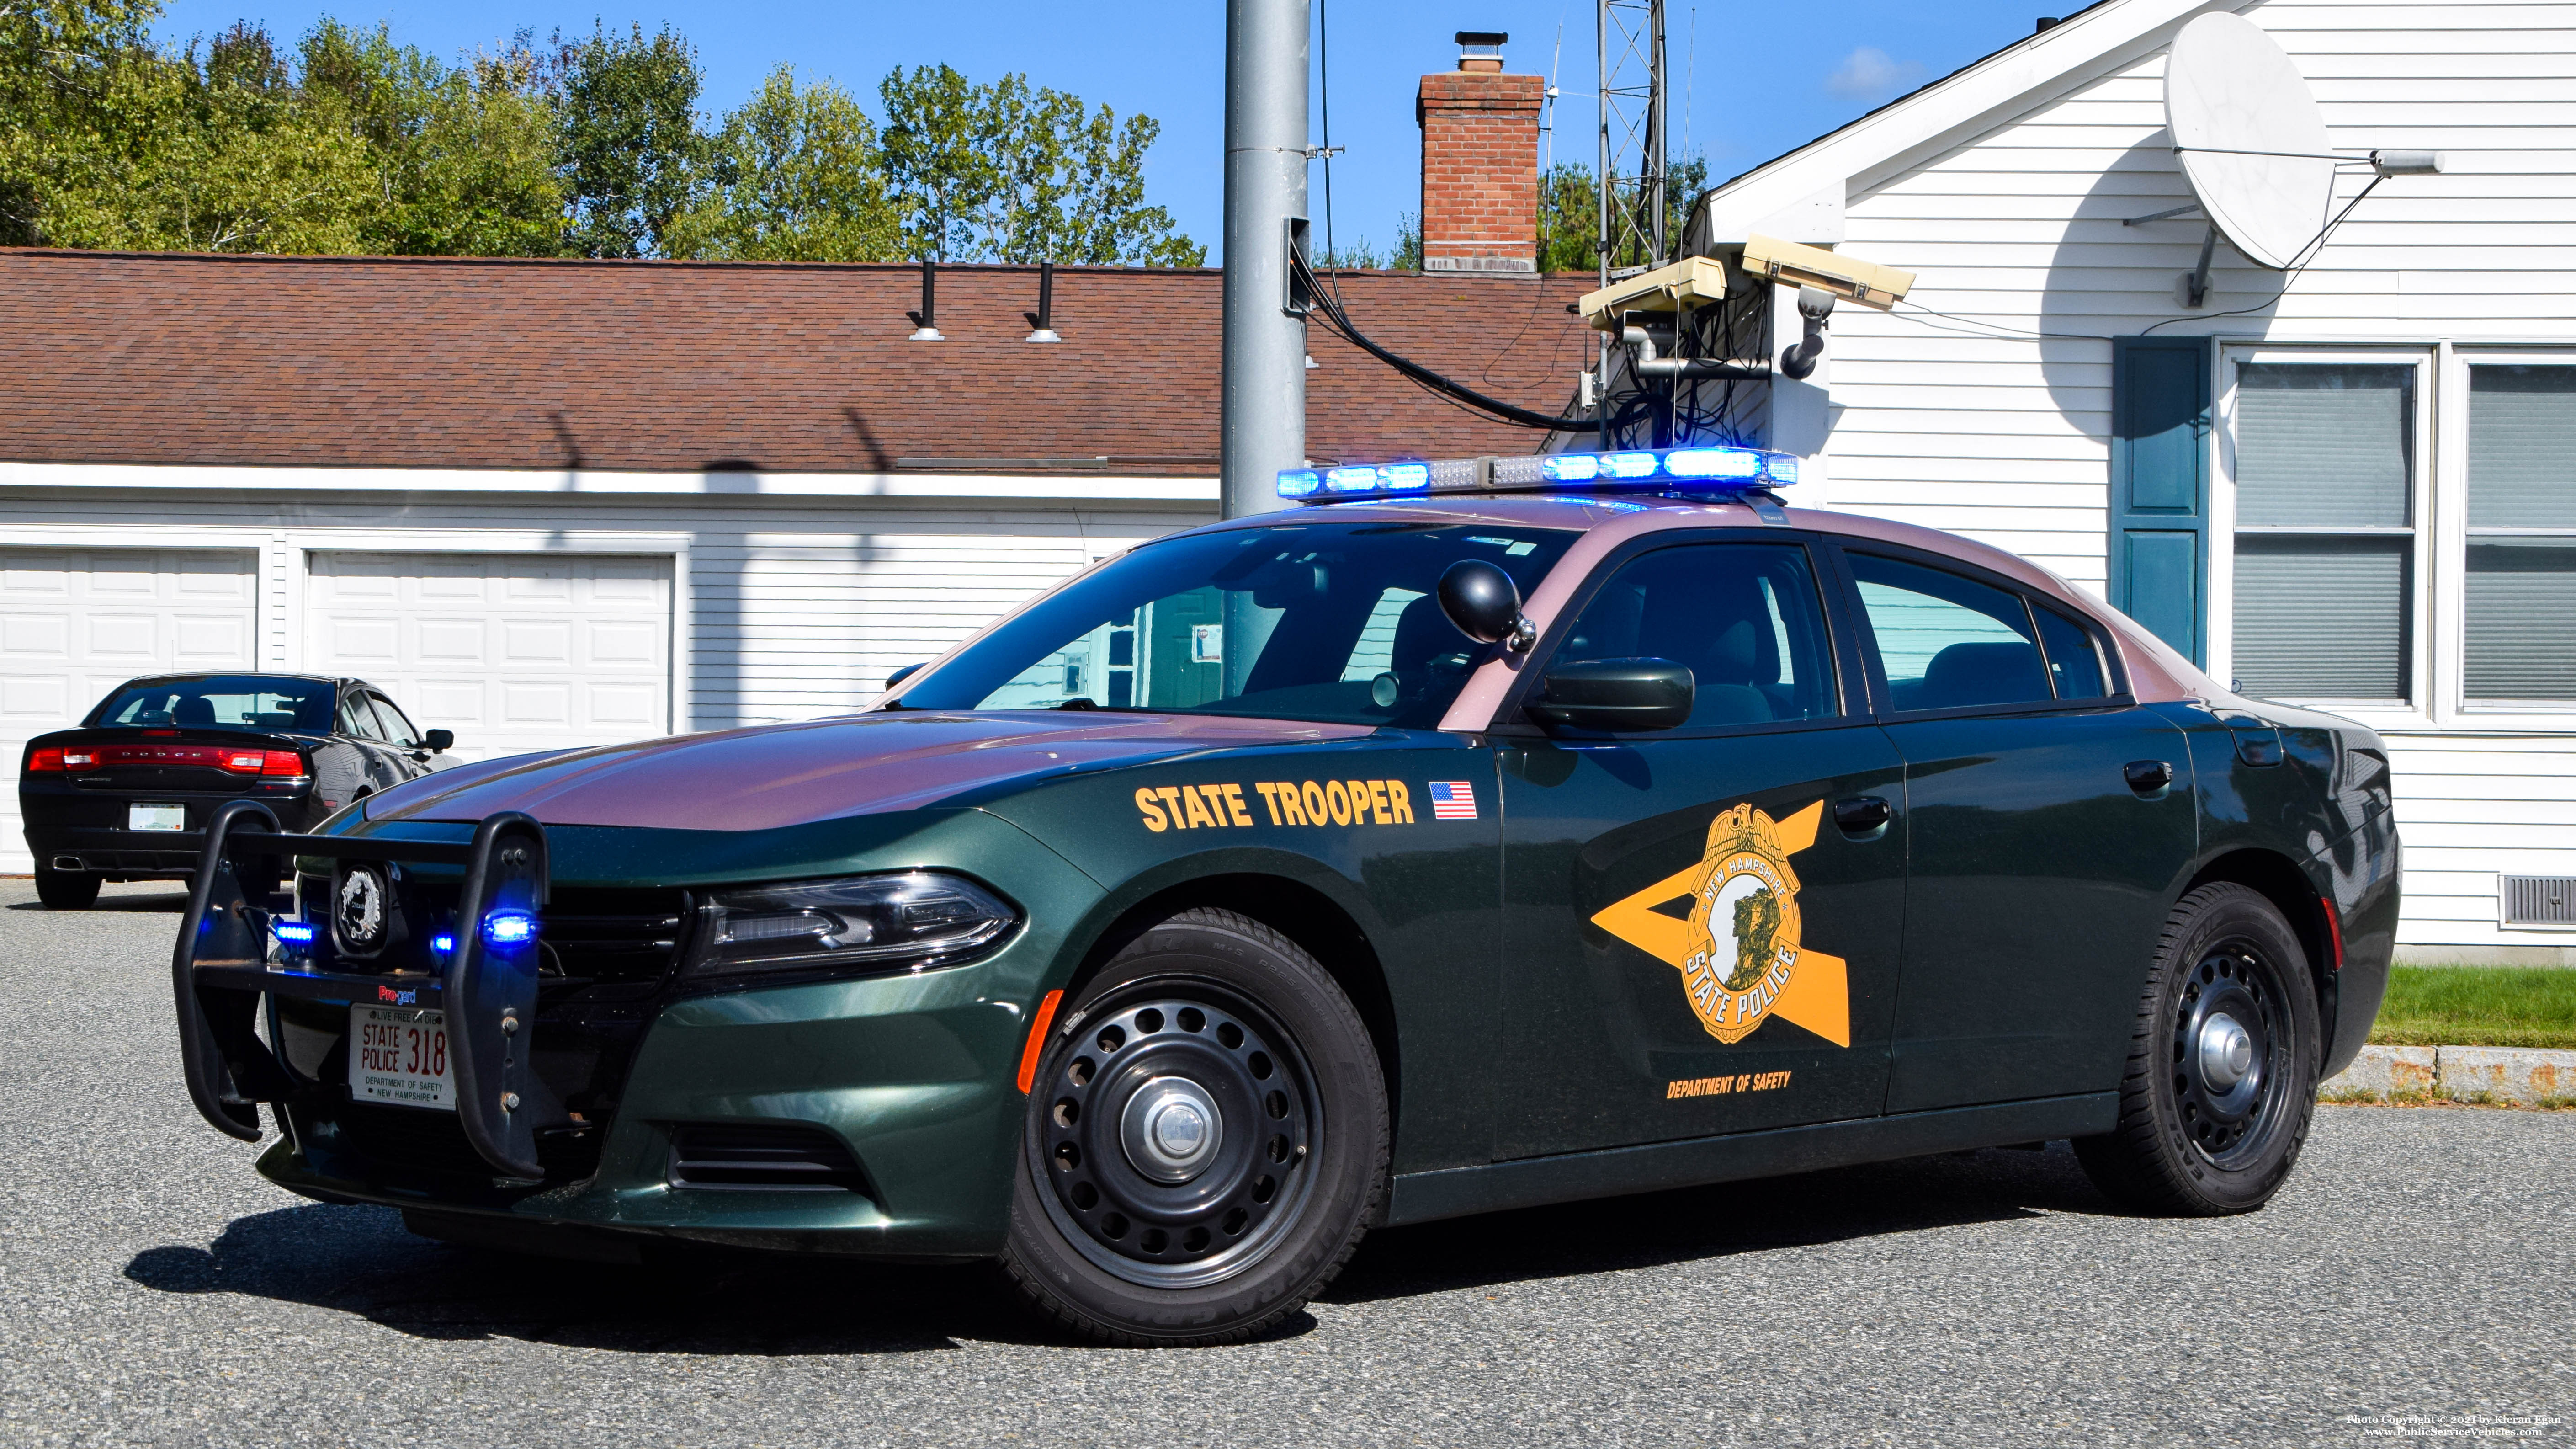 A photo  of New Hampshire State Police
            Cruiser 318, a 2015-2019 Dodge Charger             taken by Kieran Egan